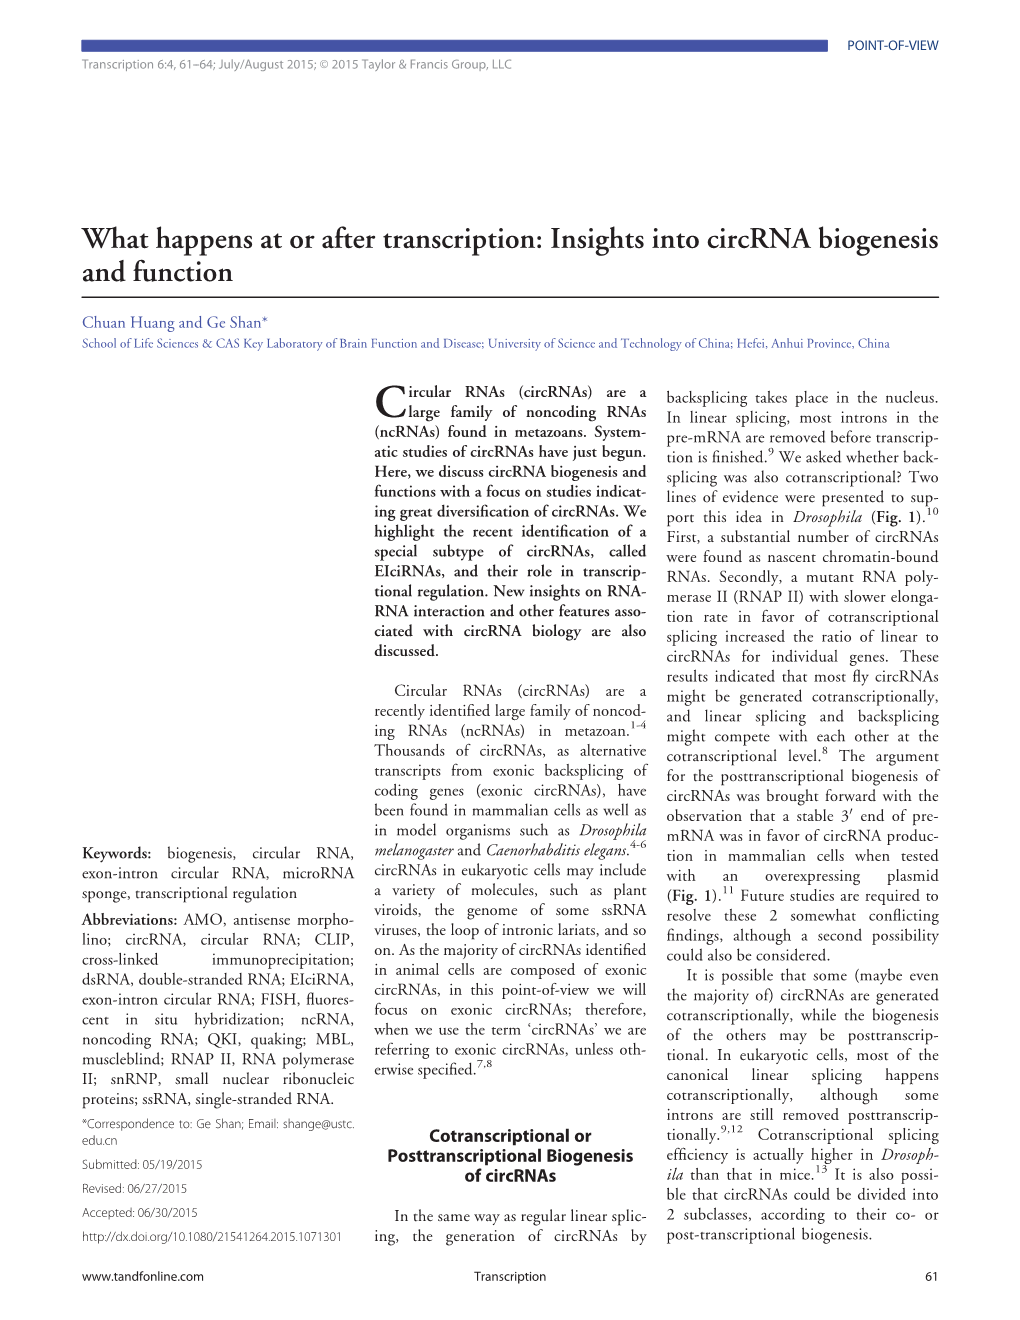 What Happens at Or After Transcription: Insights Into Circrna Biogenesis and Function